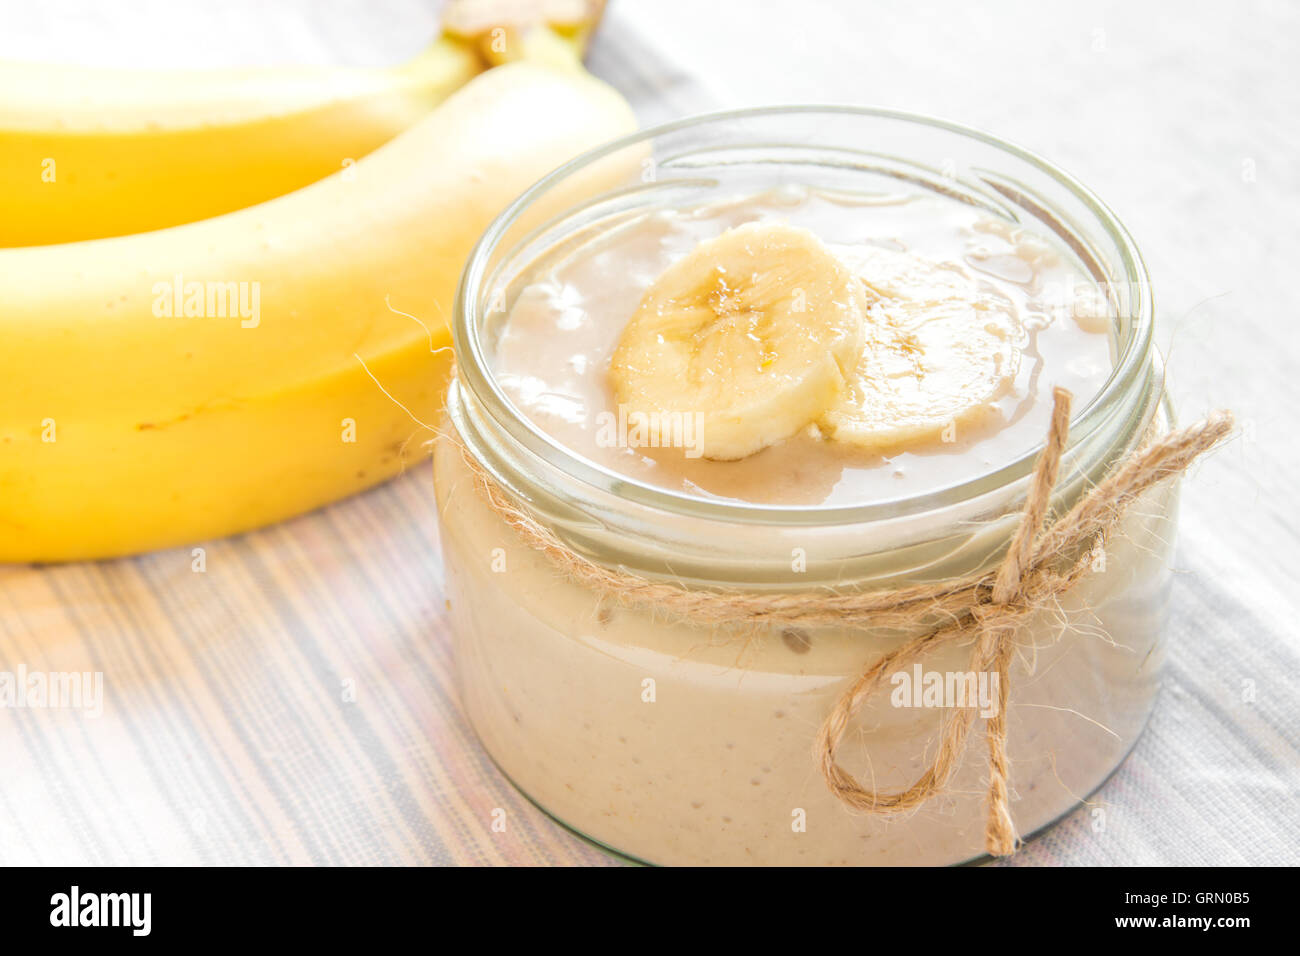 Banana mousse (pudding) for healthy vegetarian dessert over white background Stock Photo